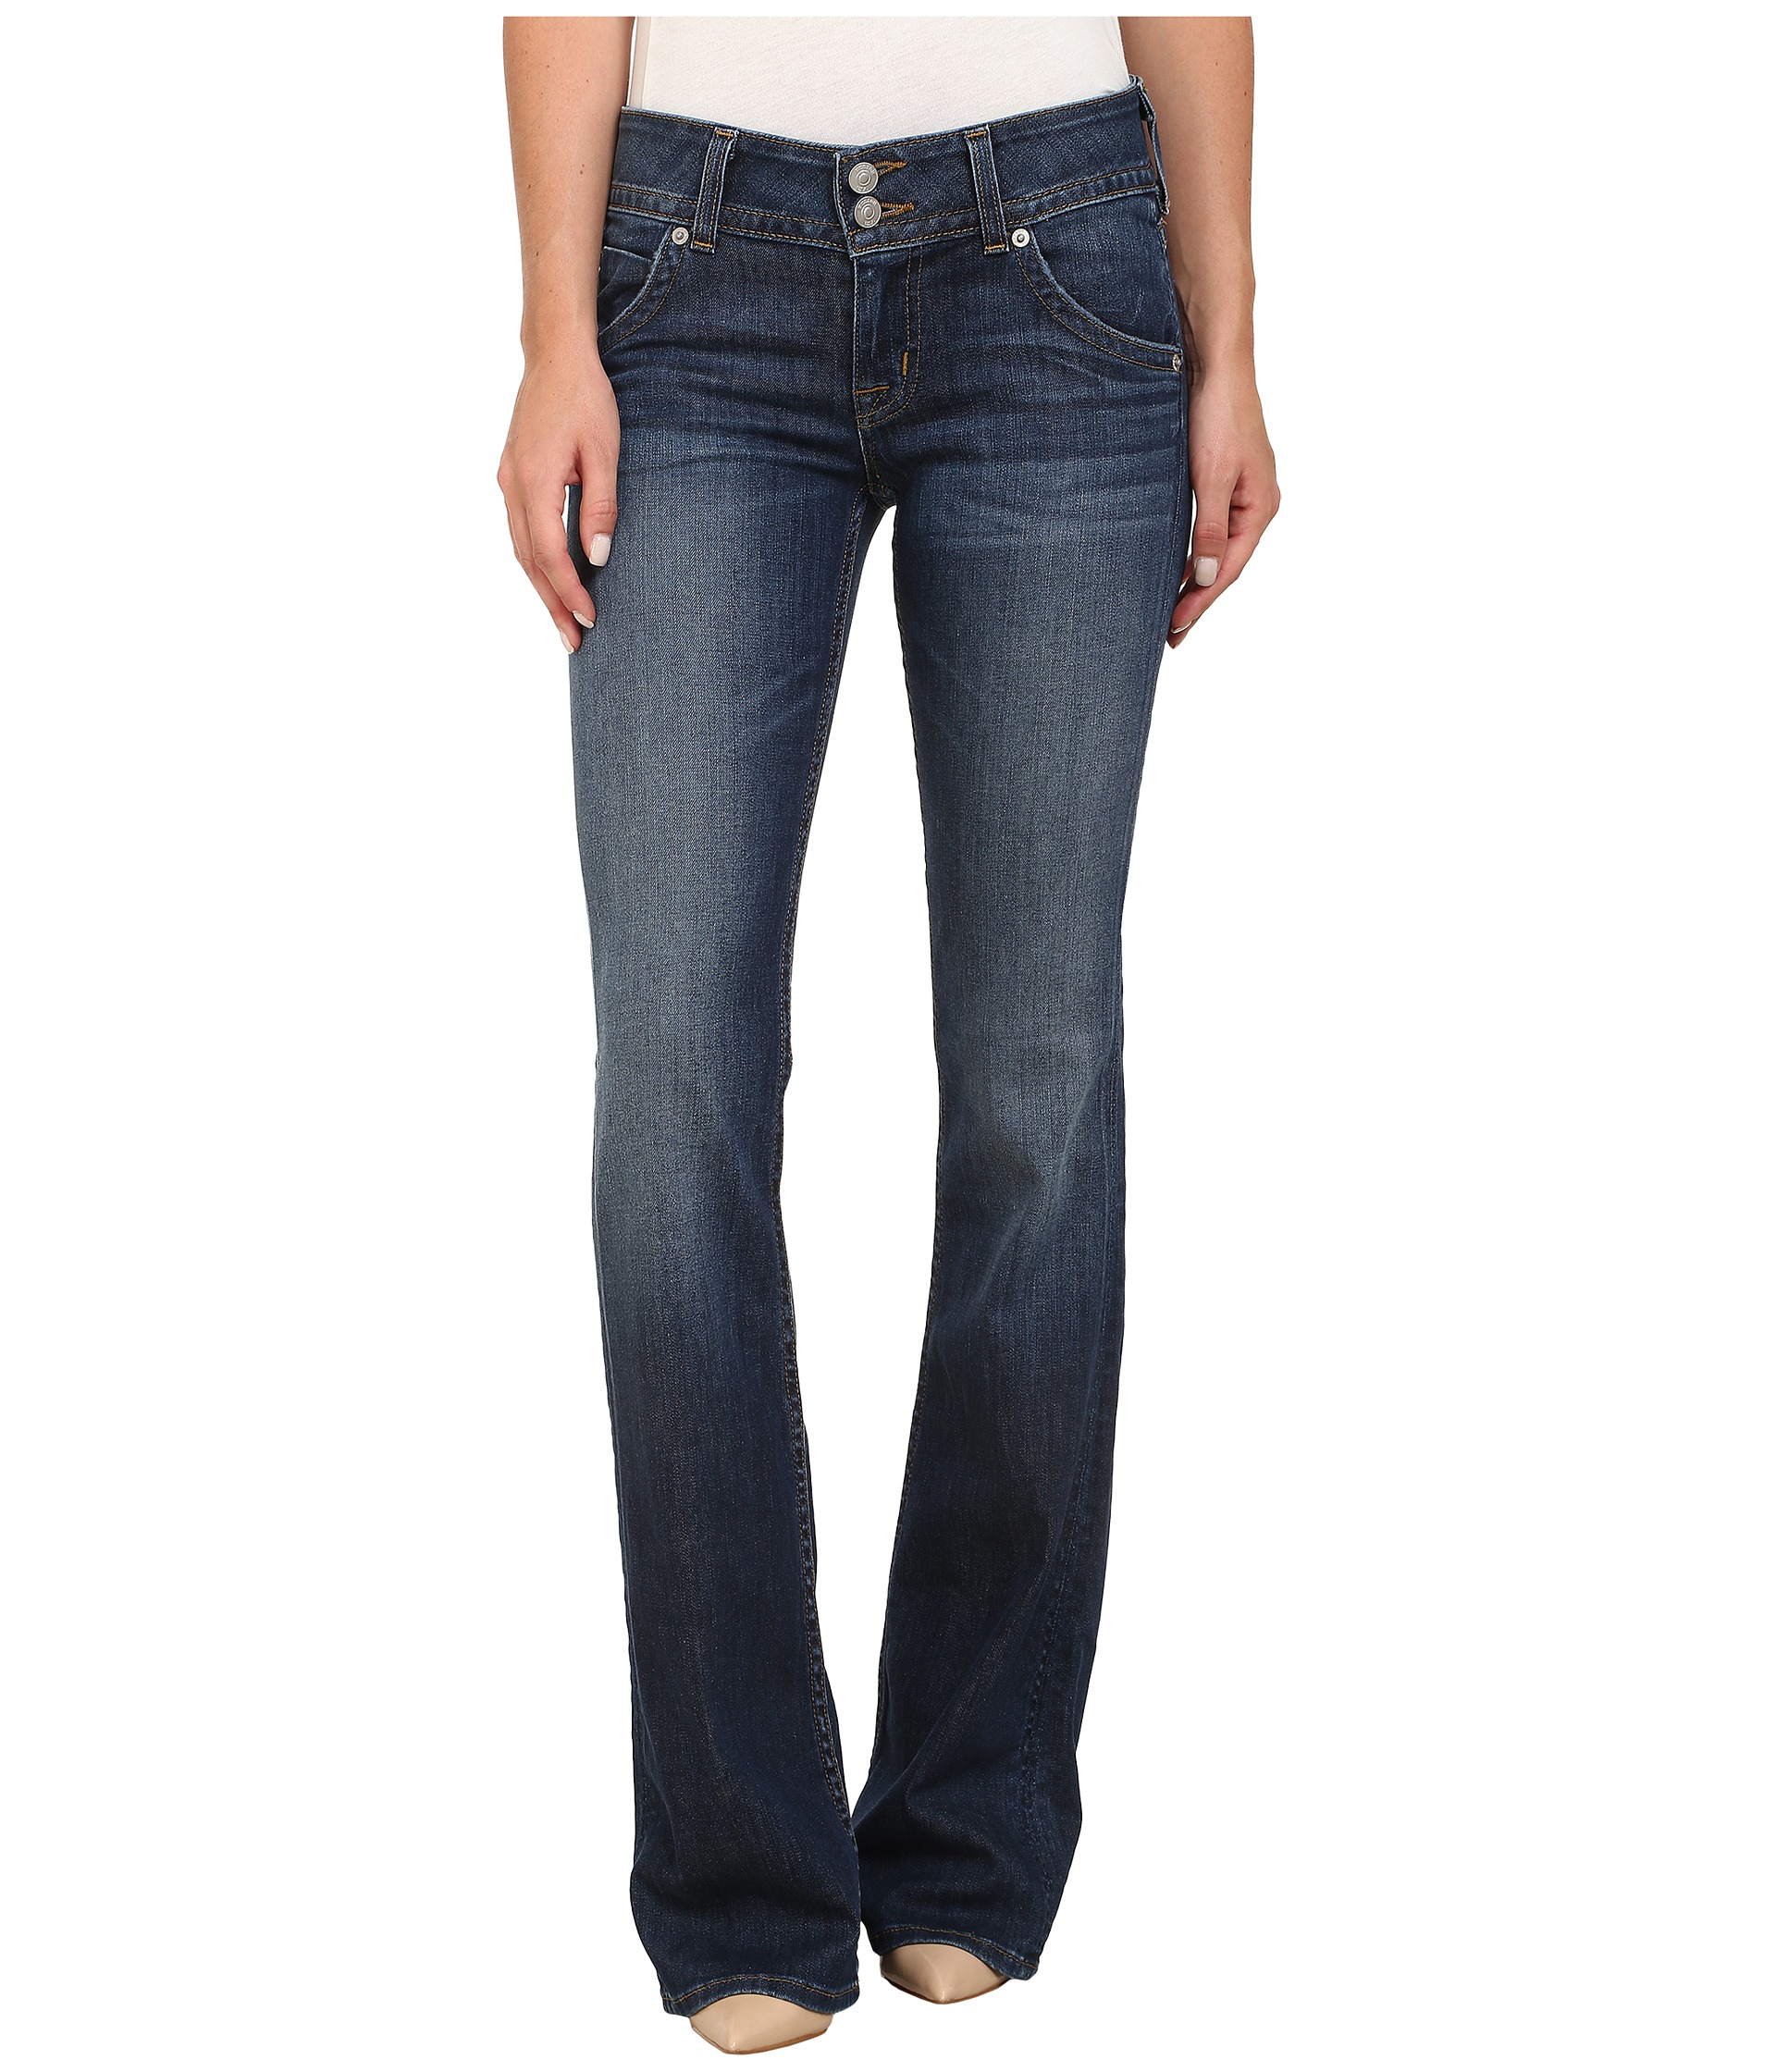 Hudson Signature Bootcut Jeans in Enlightened - Zappos.com Free ...